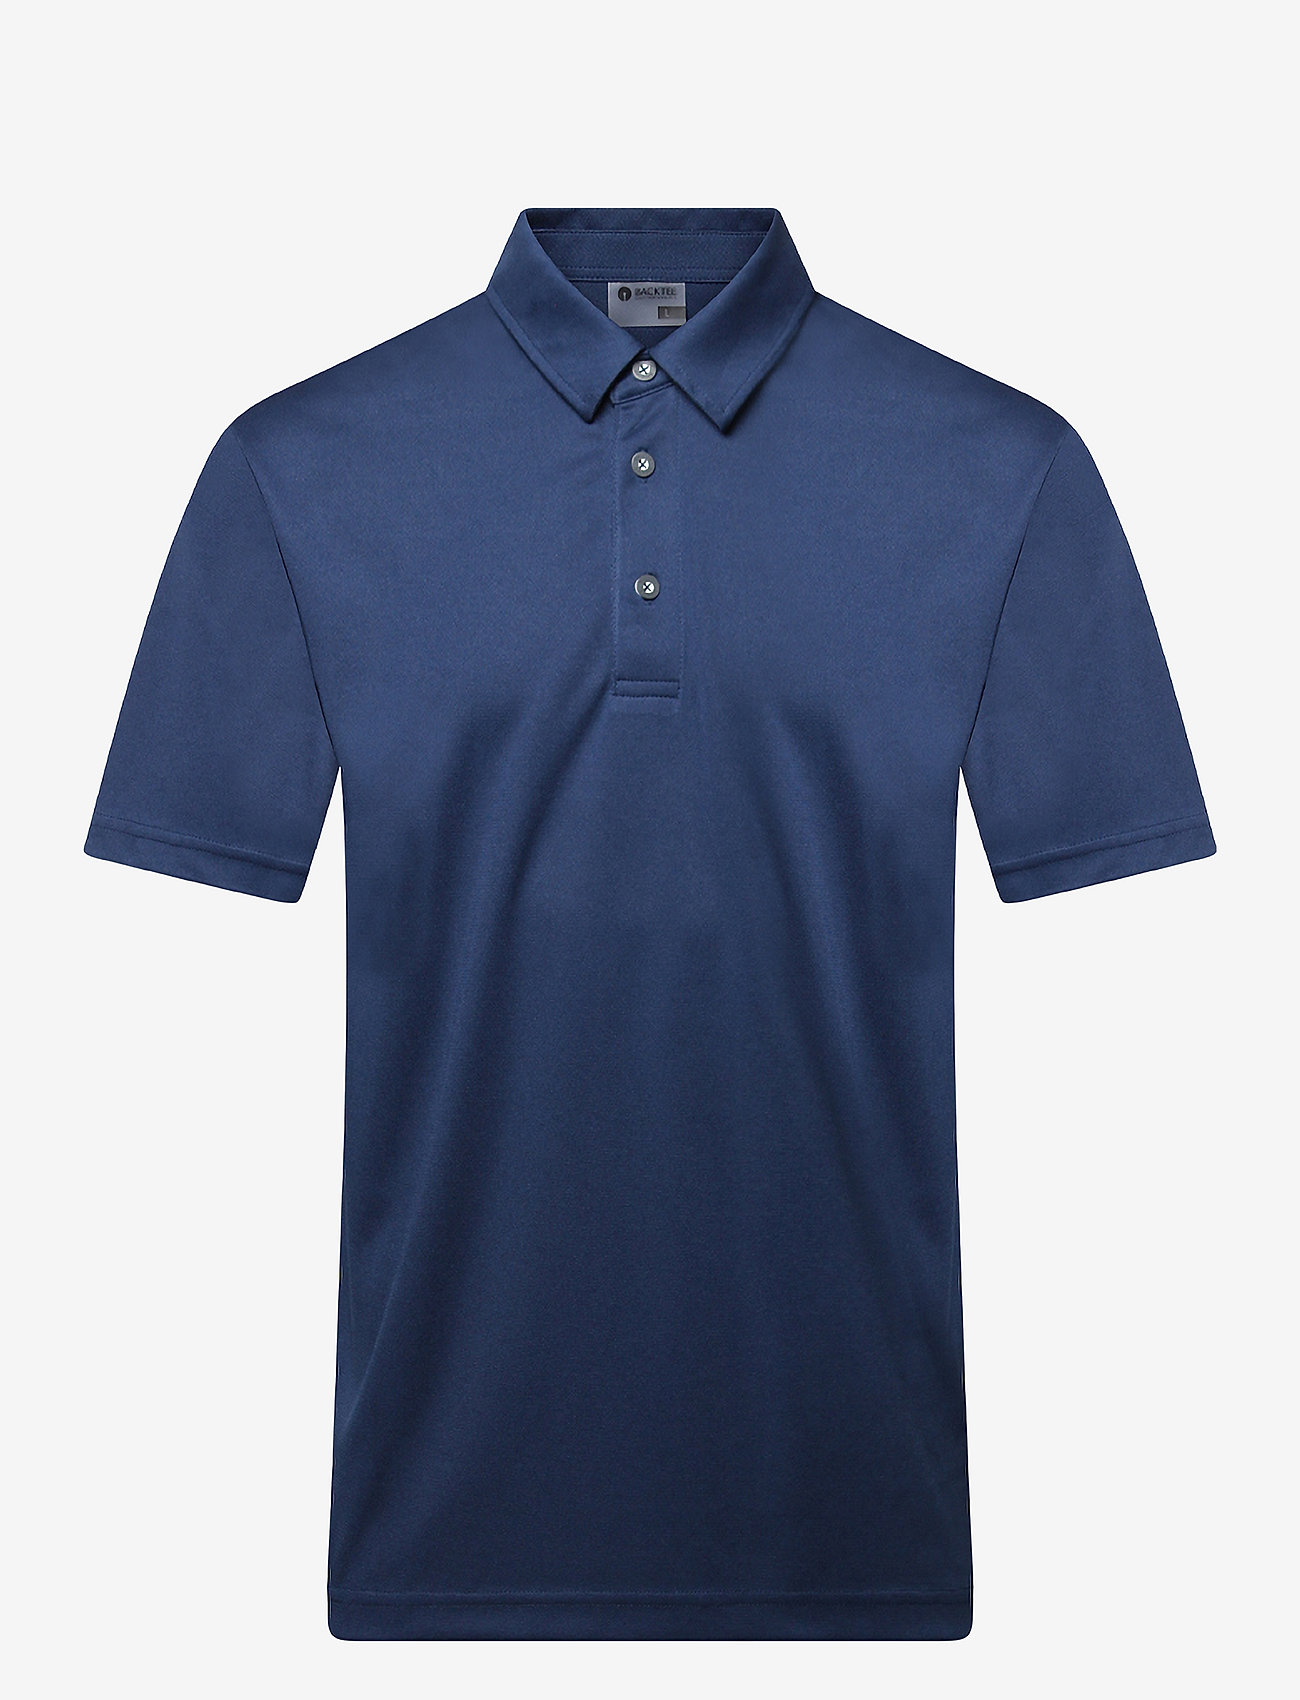 BACKTEE - Mens Performance Polo - lyhythihaiset - navy - 0